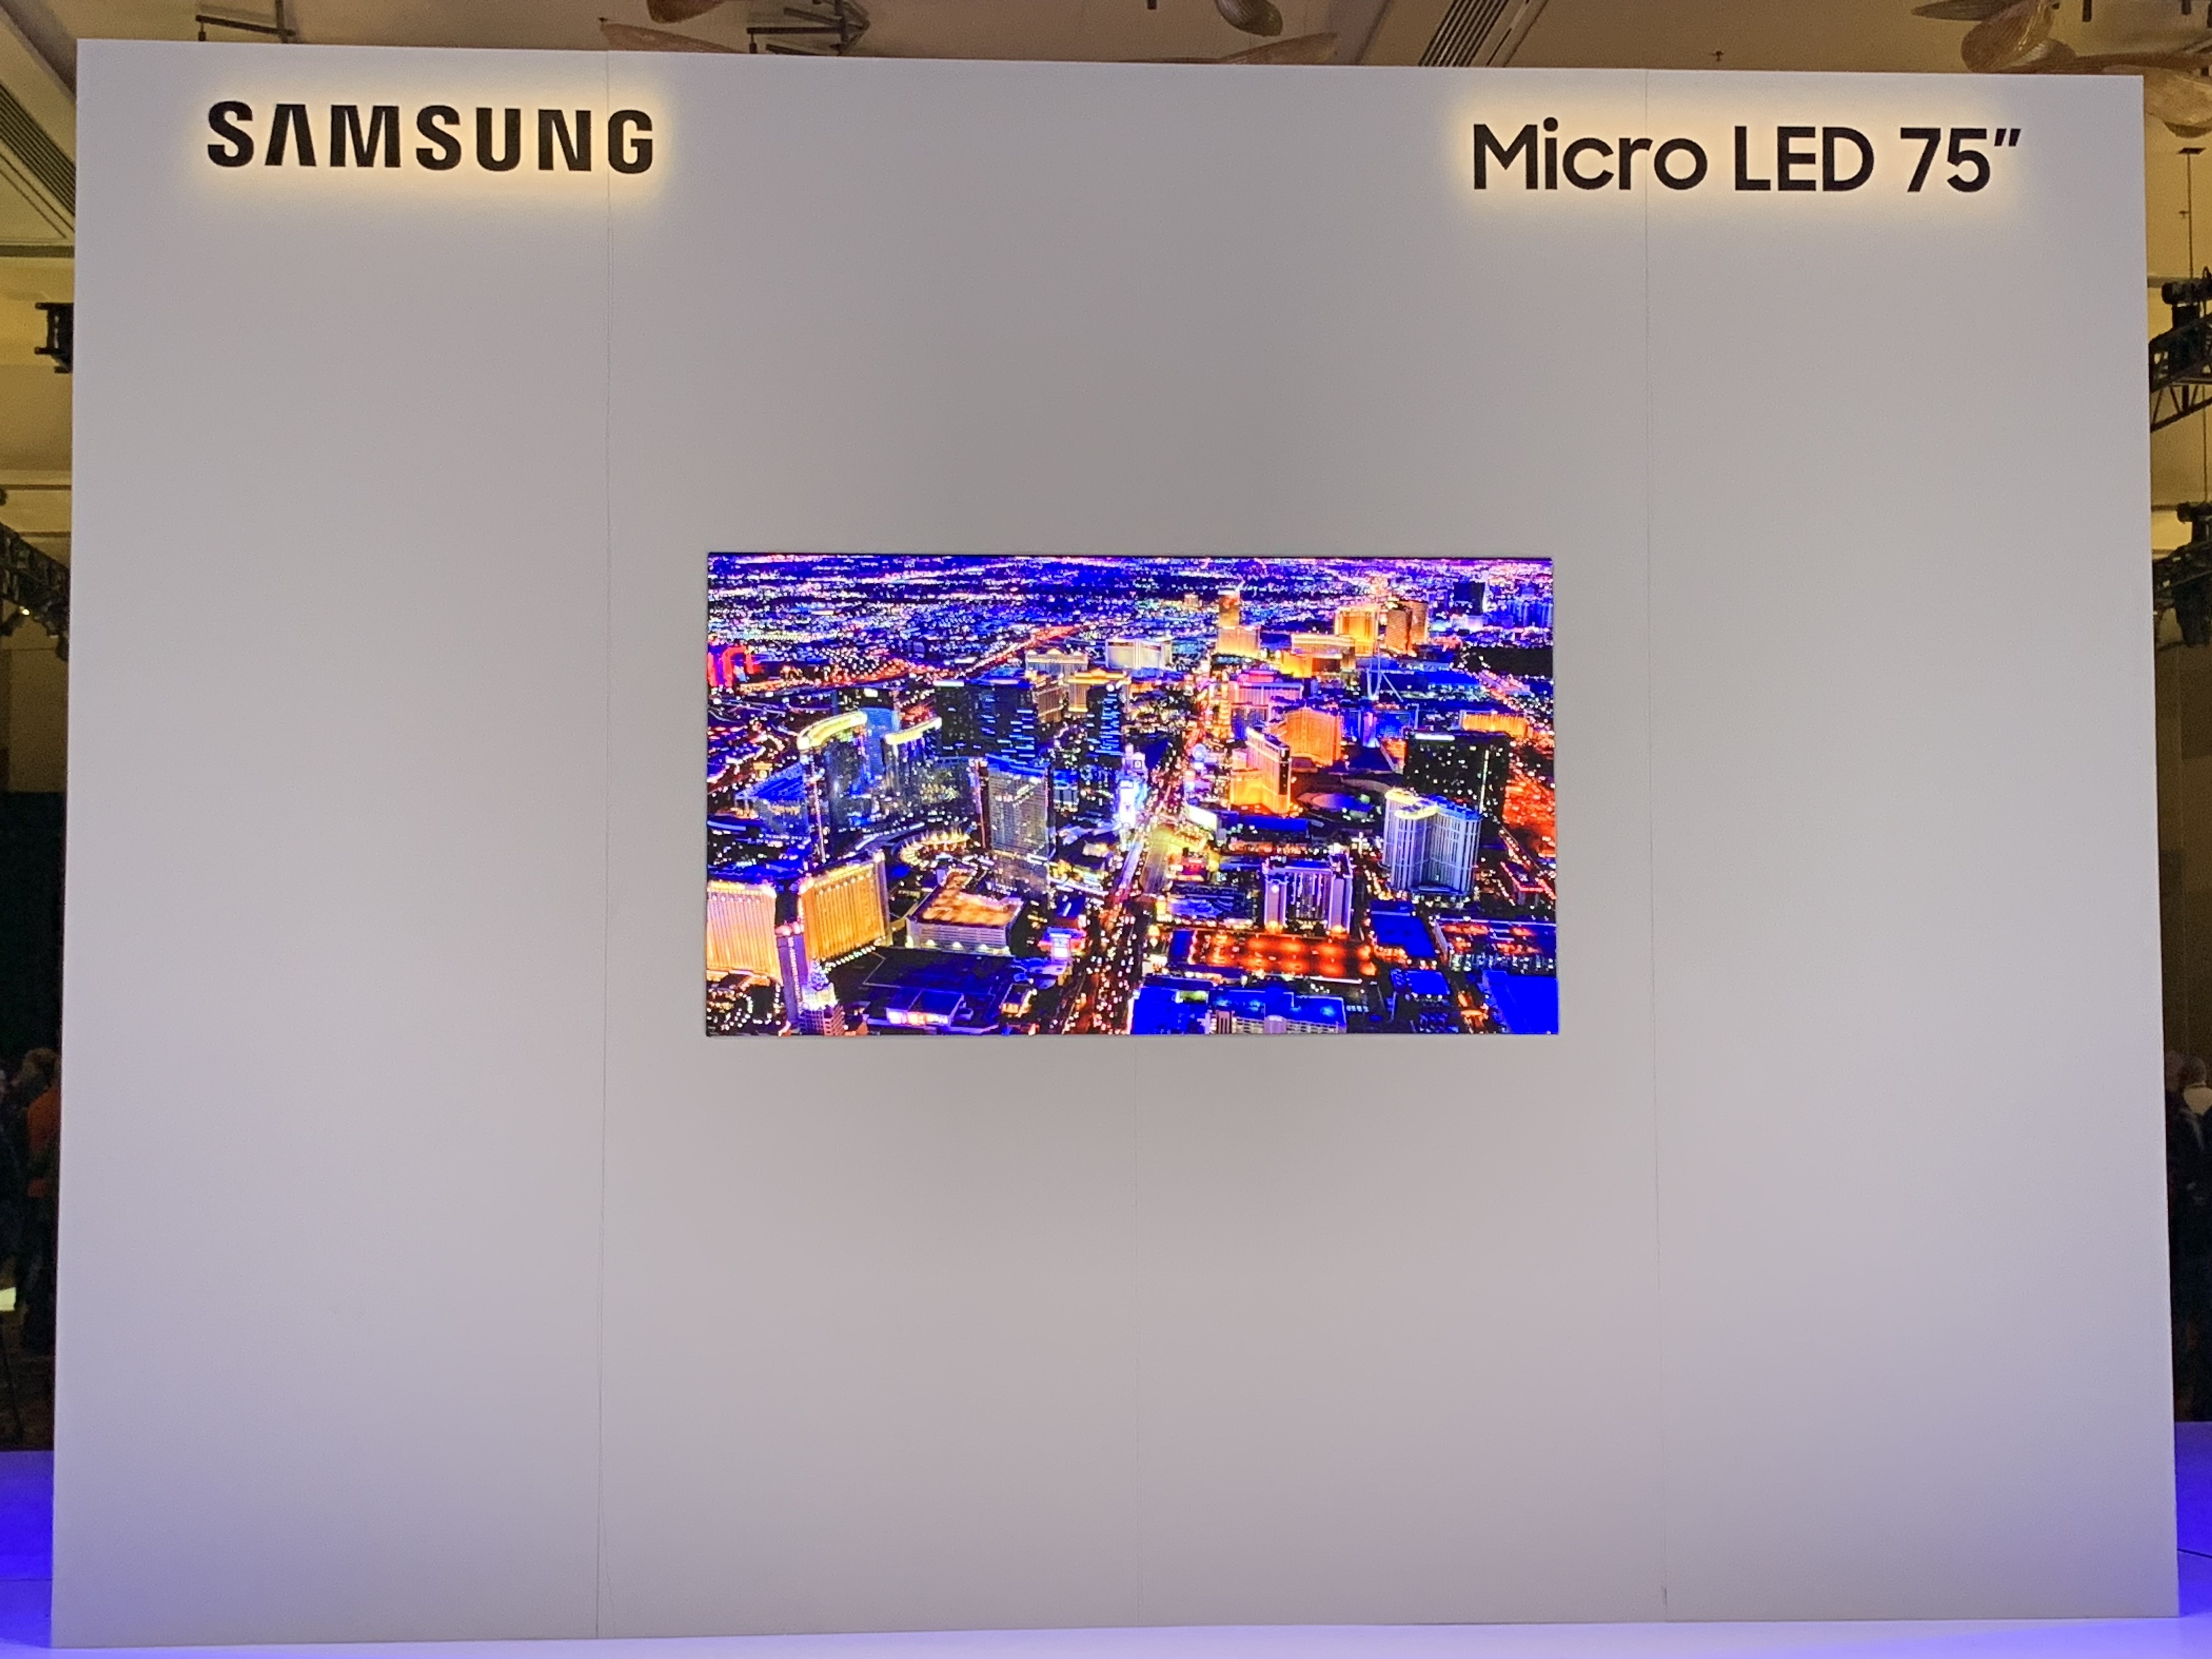 Samsung 75in Micro LED TV hands-on review